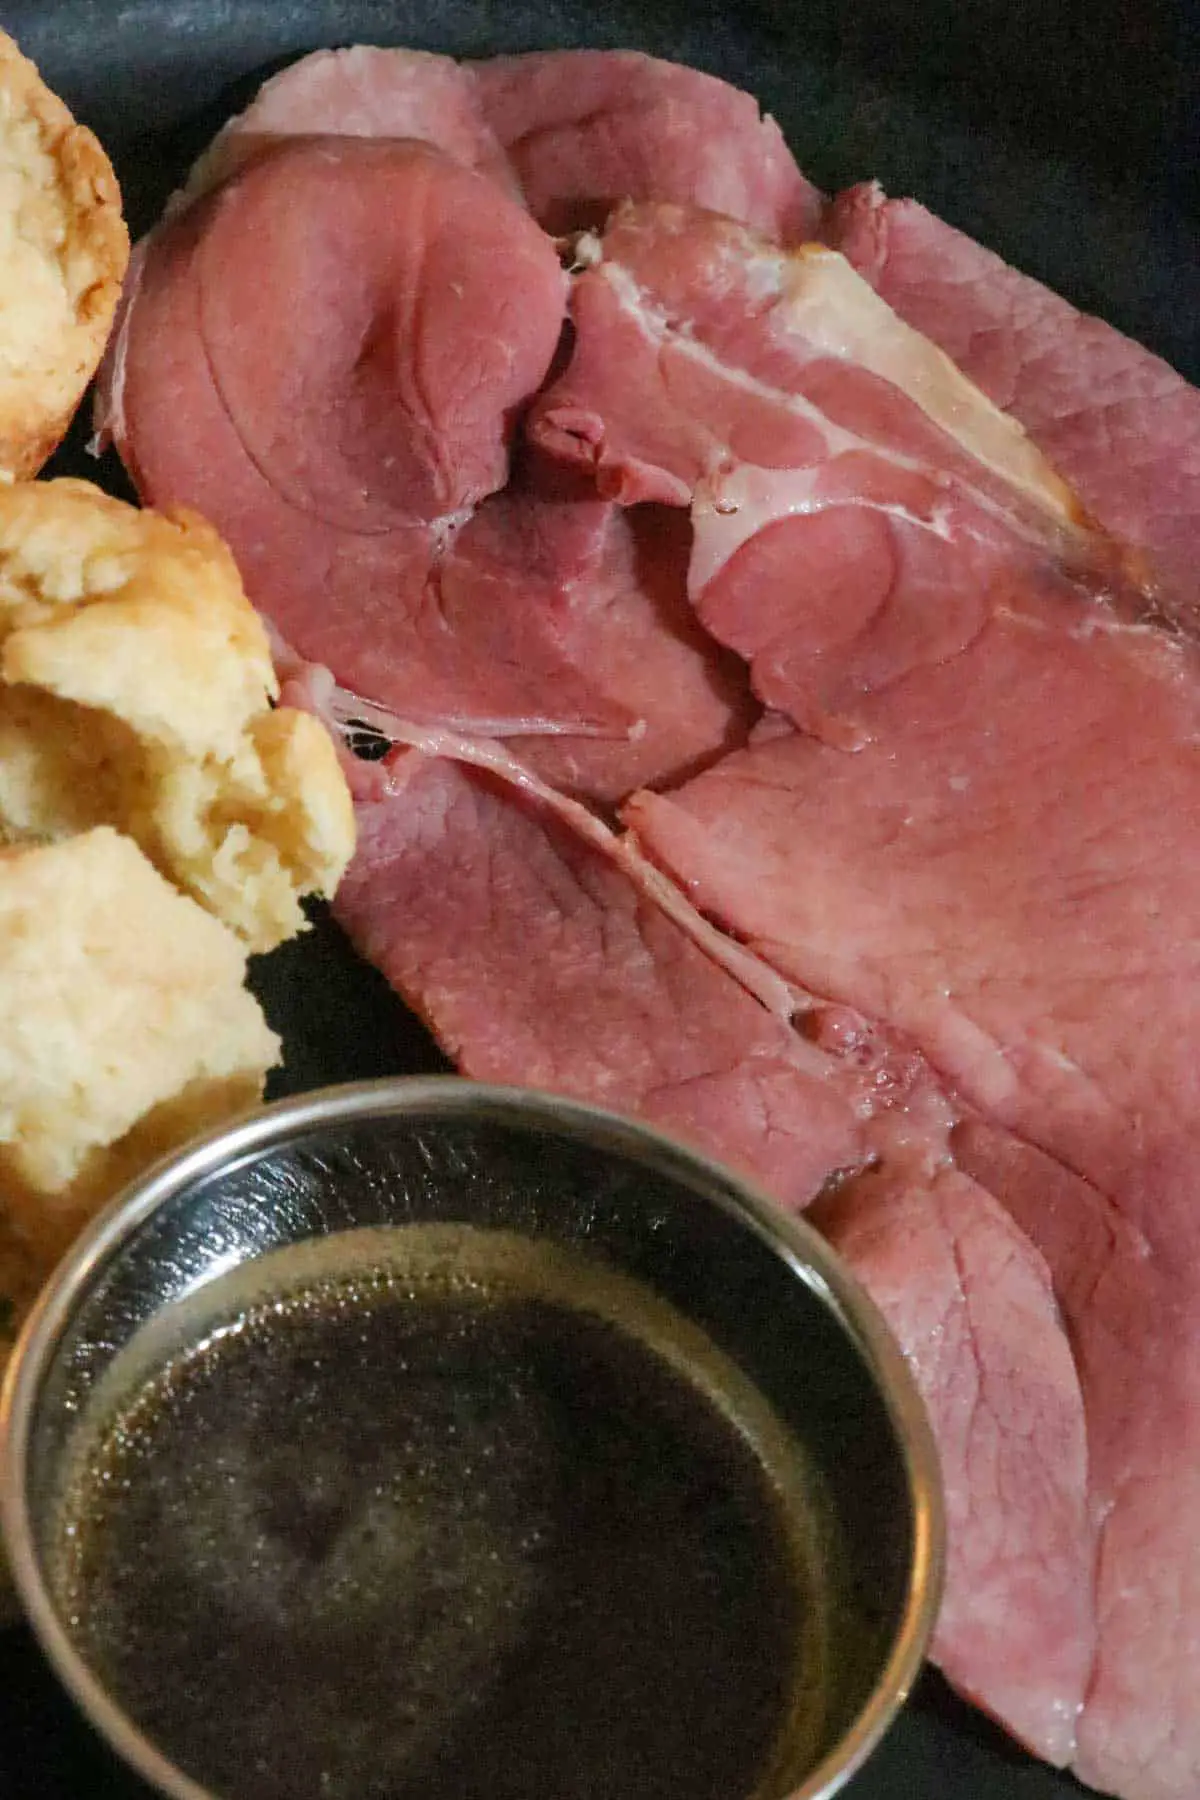 Cooked slices of country ham, a silver bowl with red eye gravy, and biscuits next to the ham.